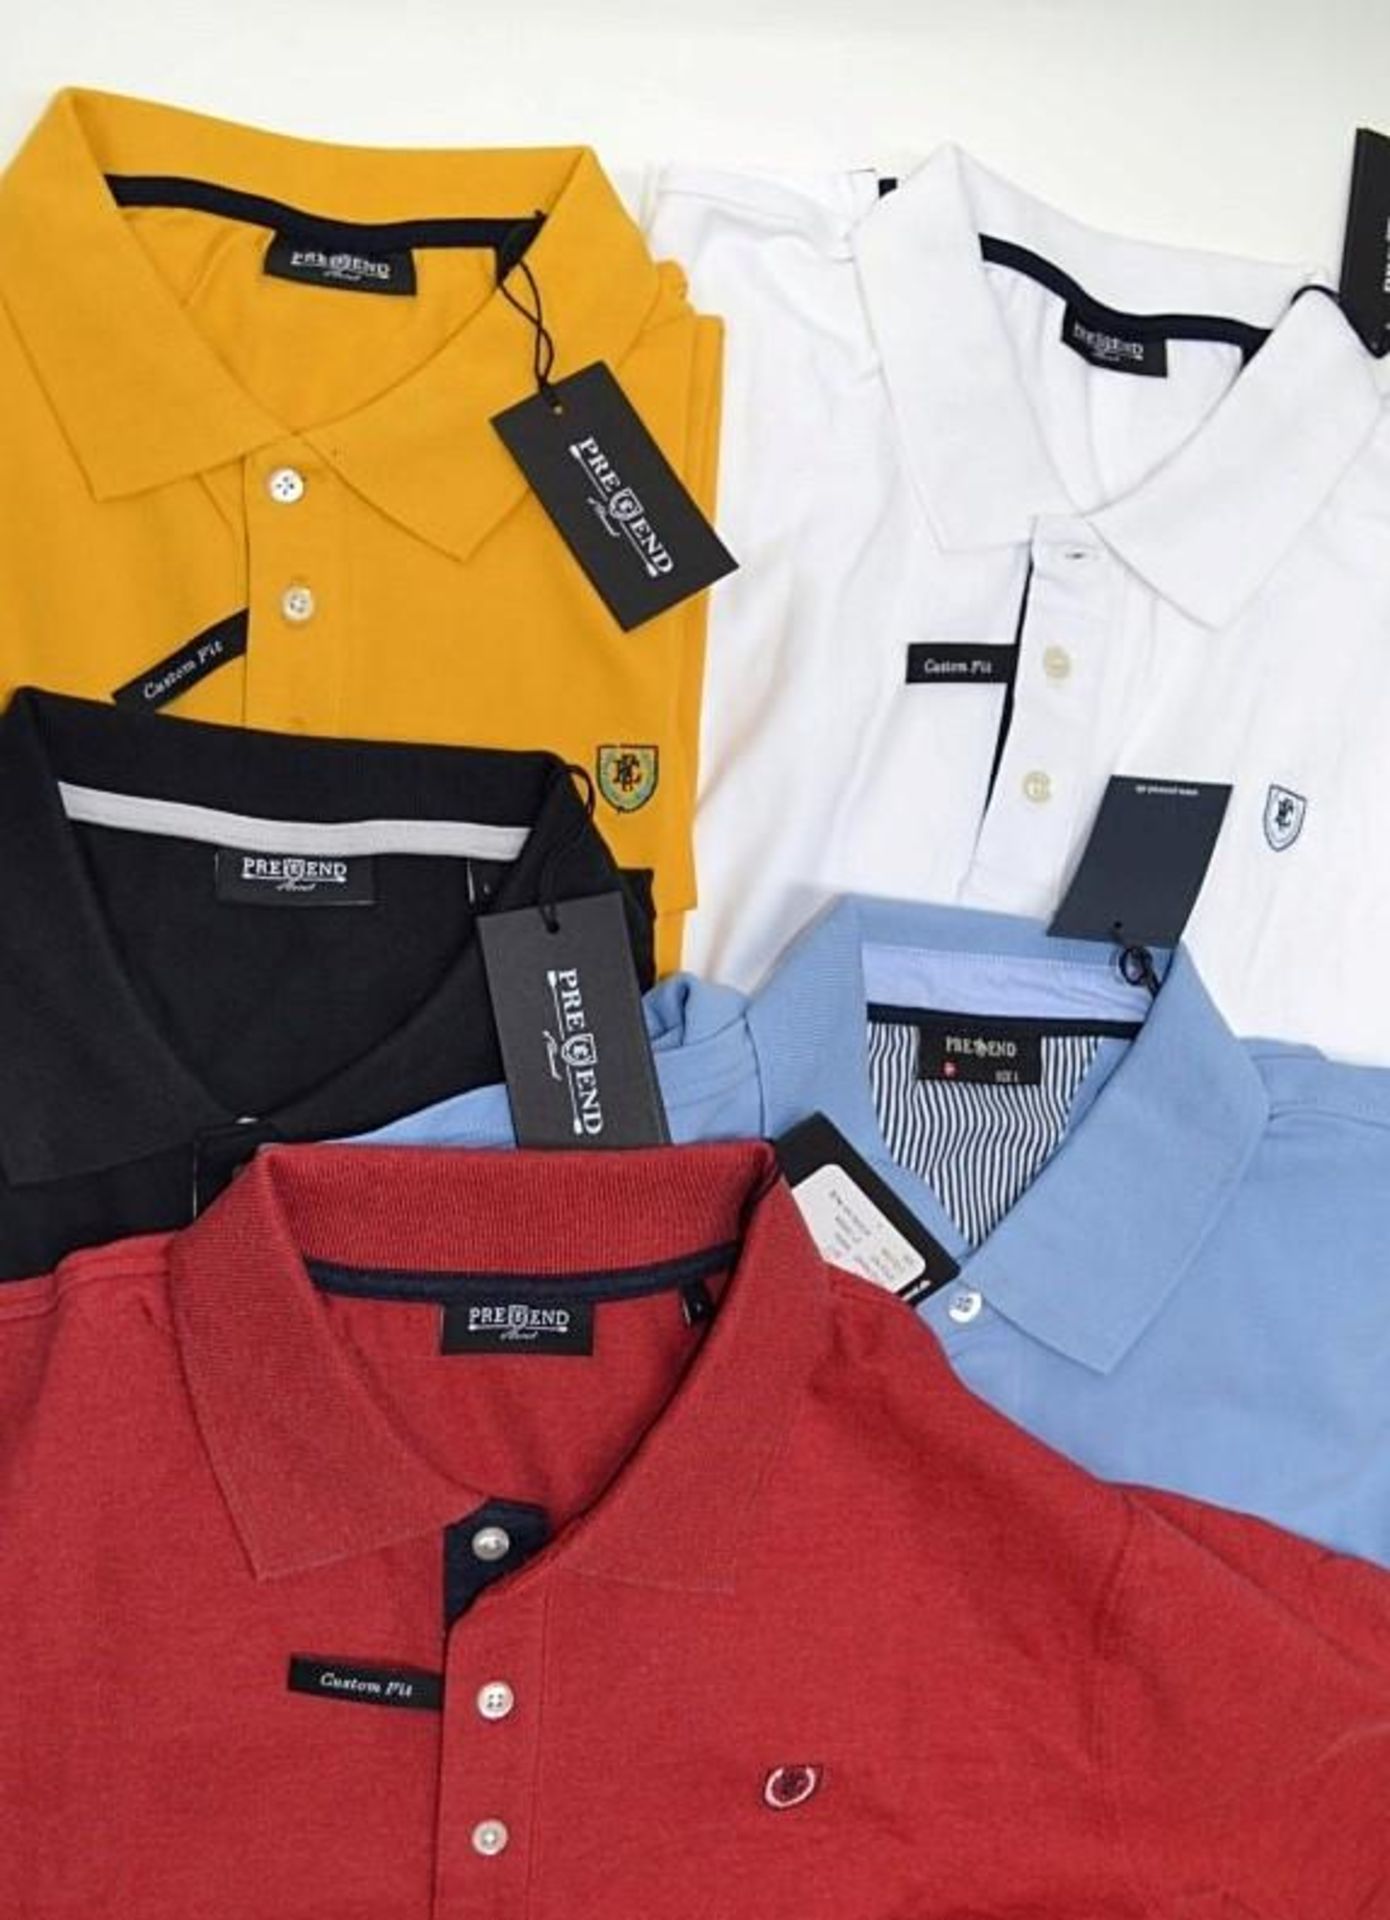 5 x Assorted Pre End Branded Mens Short Sleeve Polo Shirts - New Stock With Tags - Recent Retail - Image 2 of 4